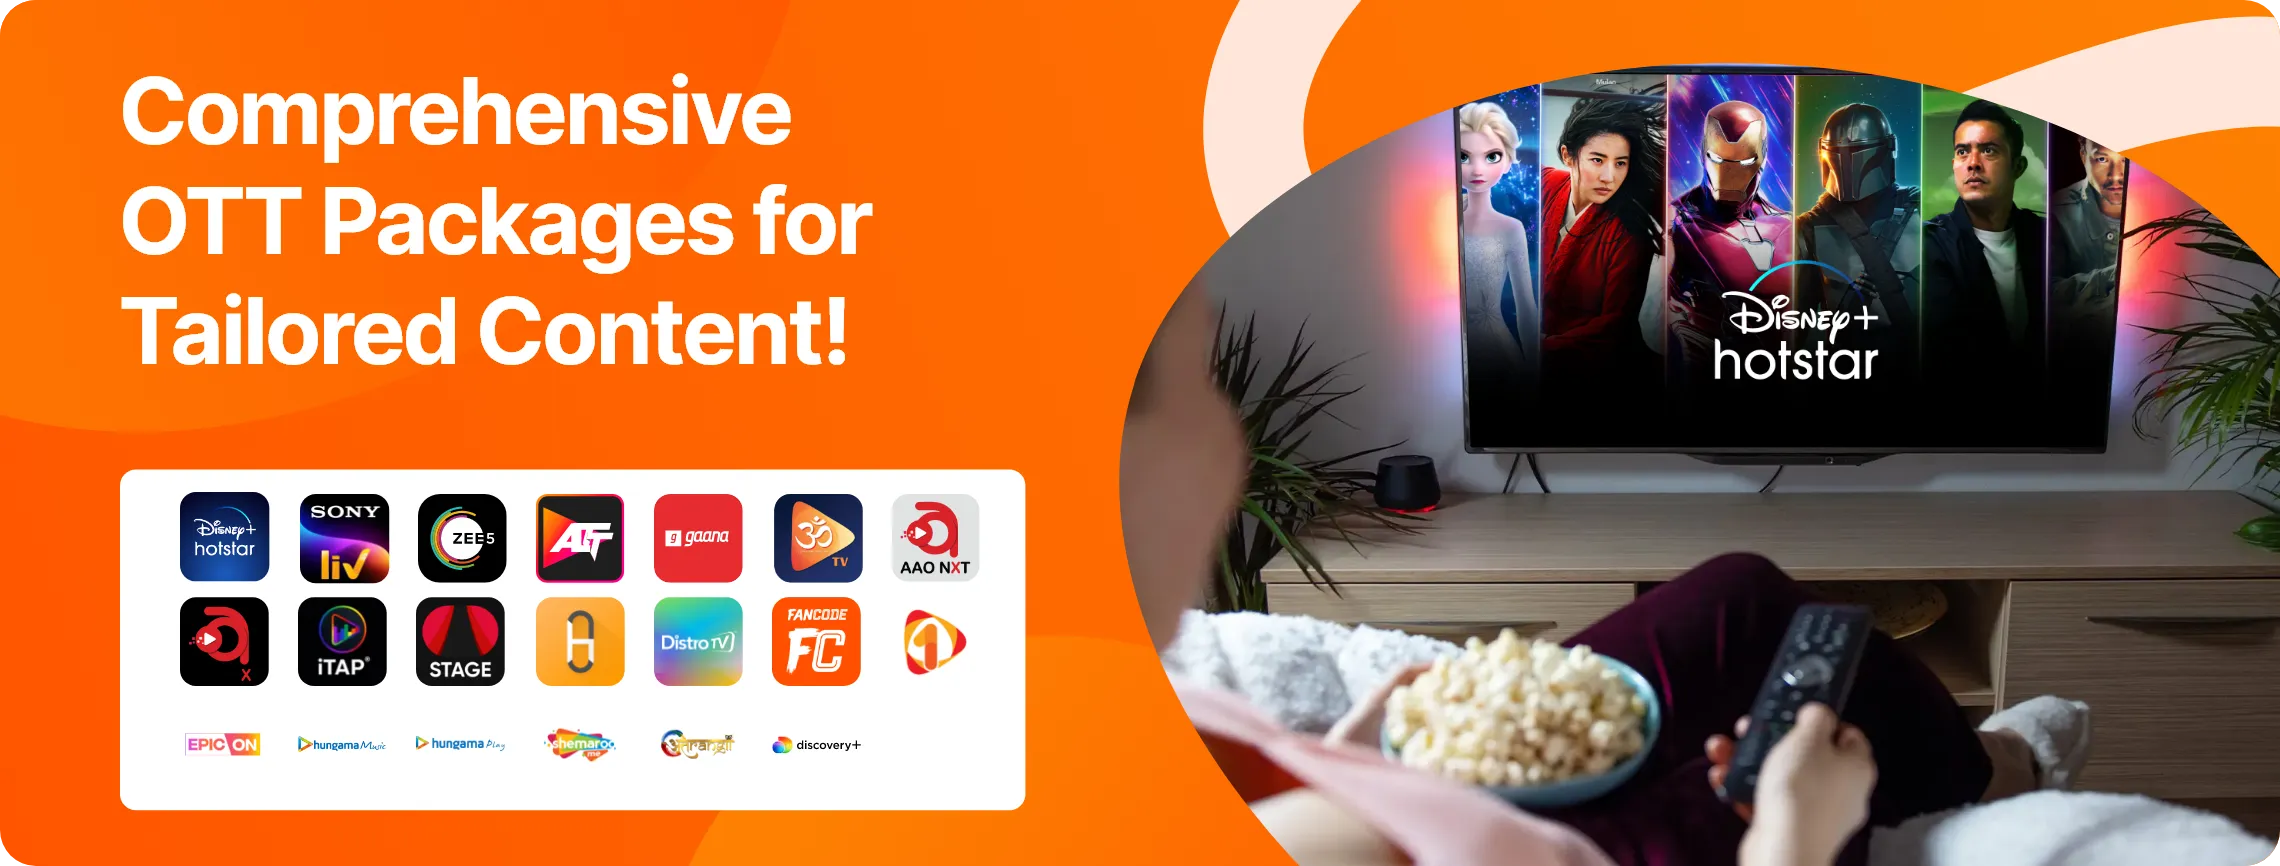 Comprehensive all-in-one OTT subscription packages for tailored content.